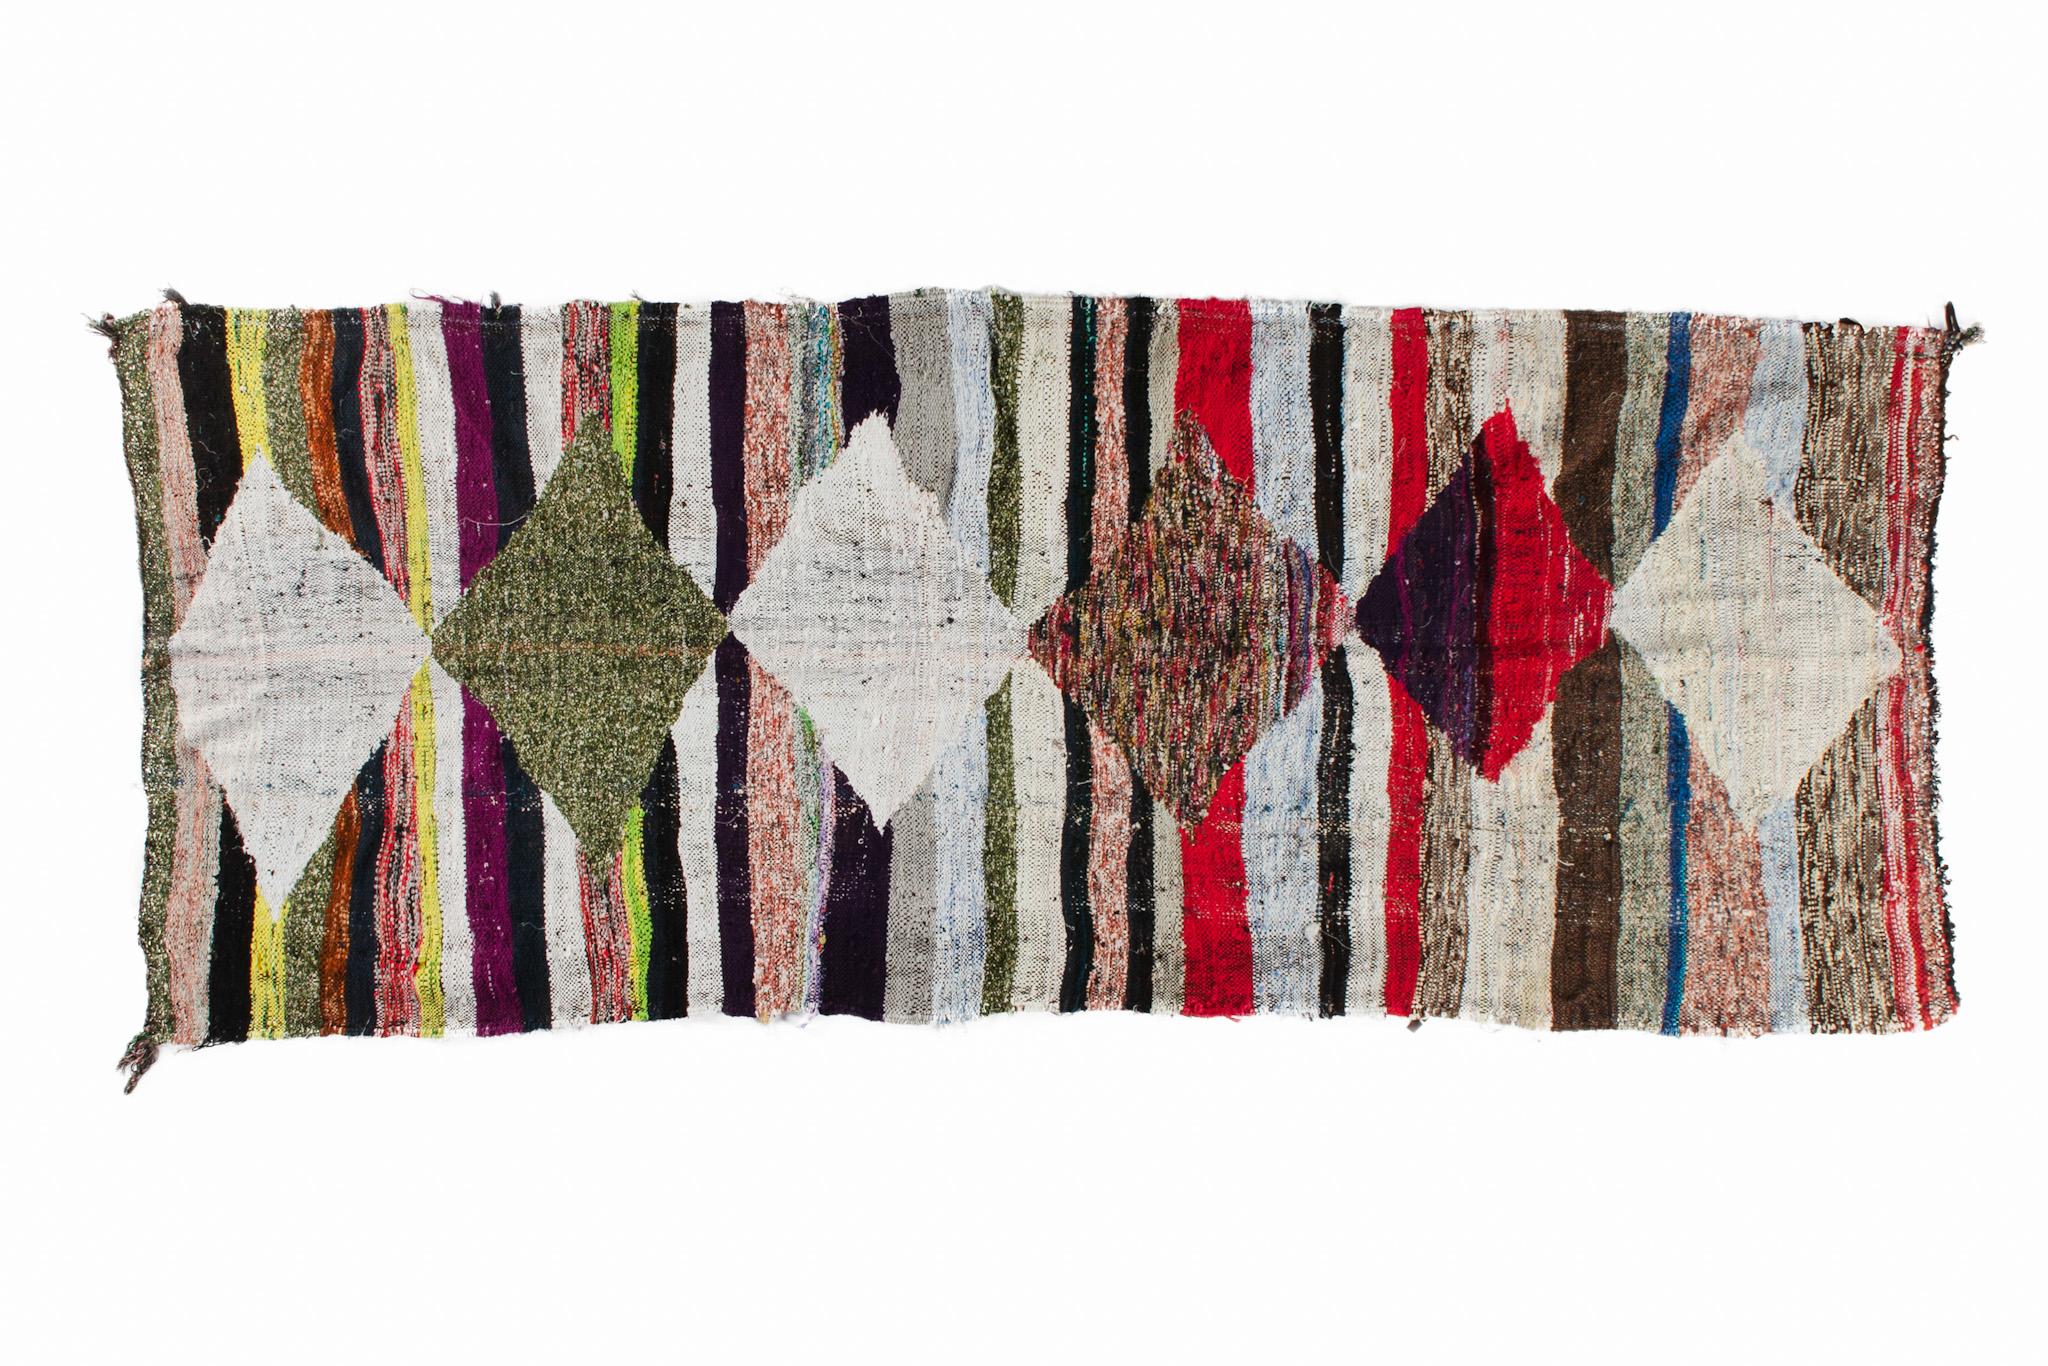 Boucharouite rugs are made of multicolored clothes pieces. This is the most authentic recycled rug you've ever seen! Measurements: 3.4'х8' / 249x104 cm.

Boucharouite – is the ancient manual technique of tying and interweaving the multicolored